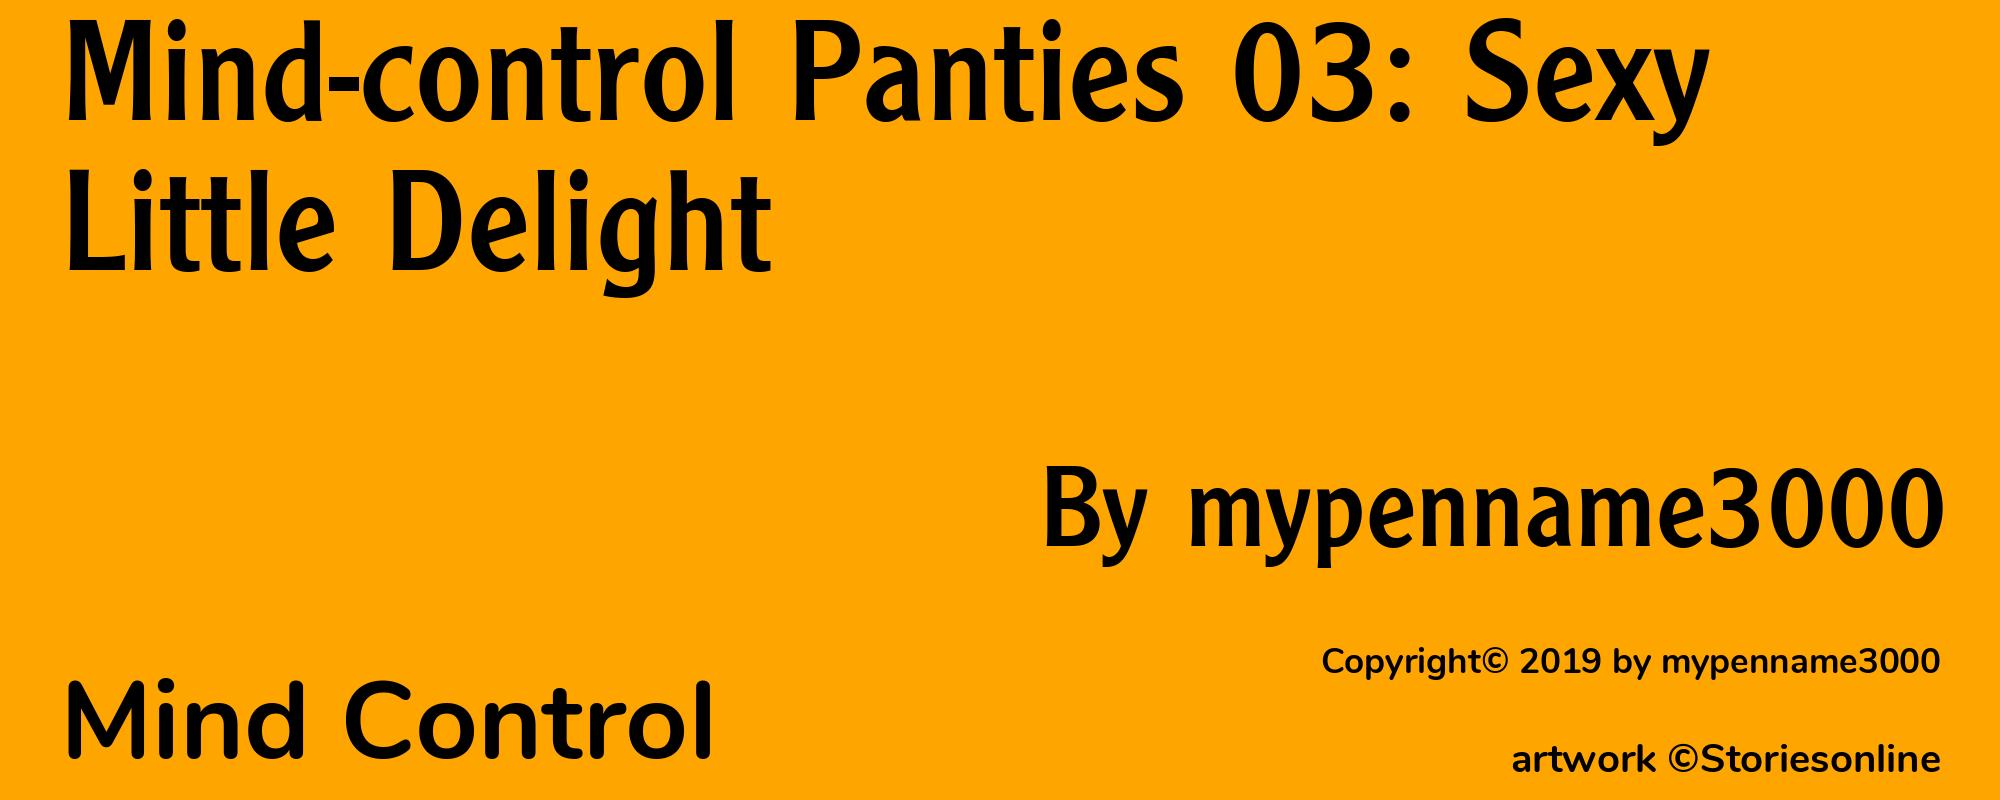 Mind-control Panties 03: Sexy Little Delight - Cover